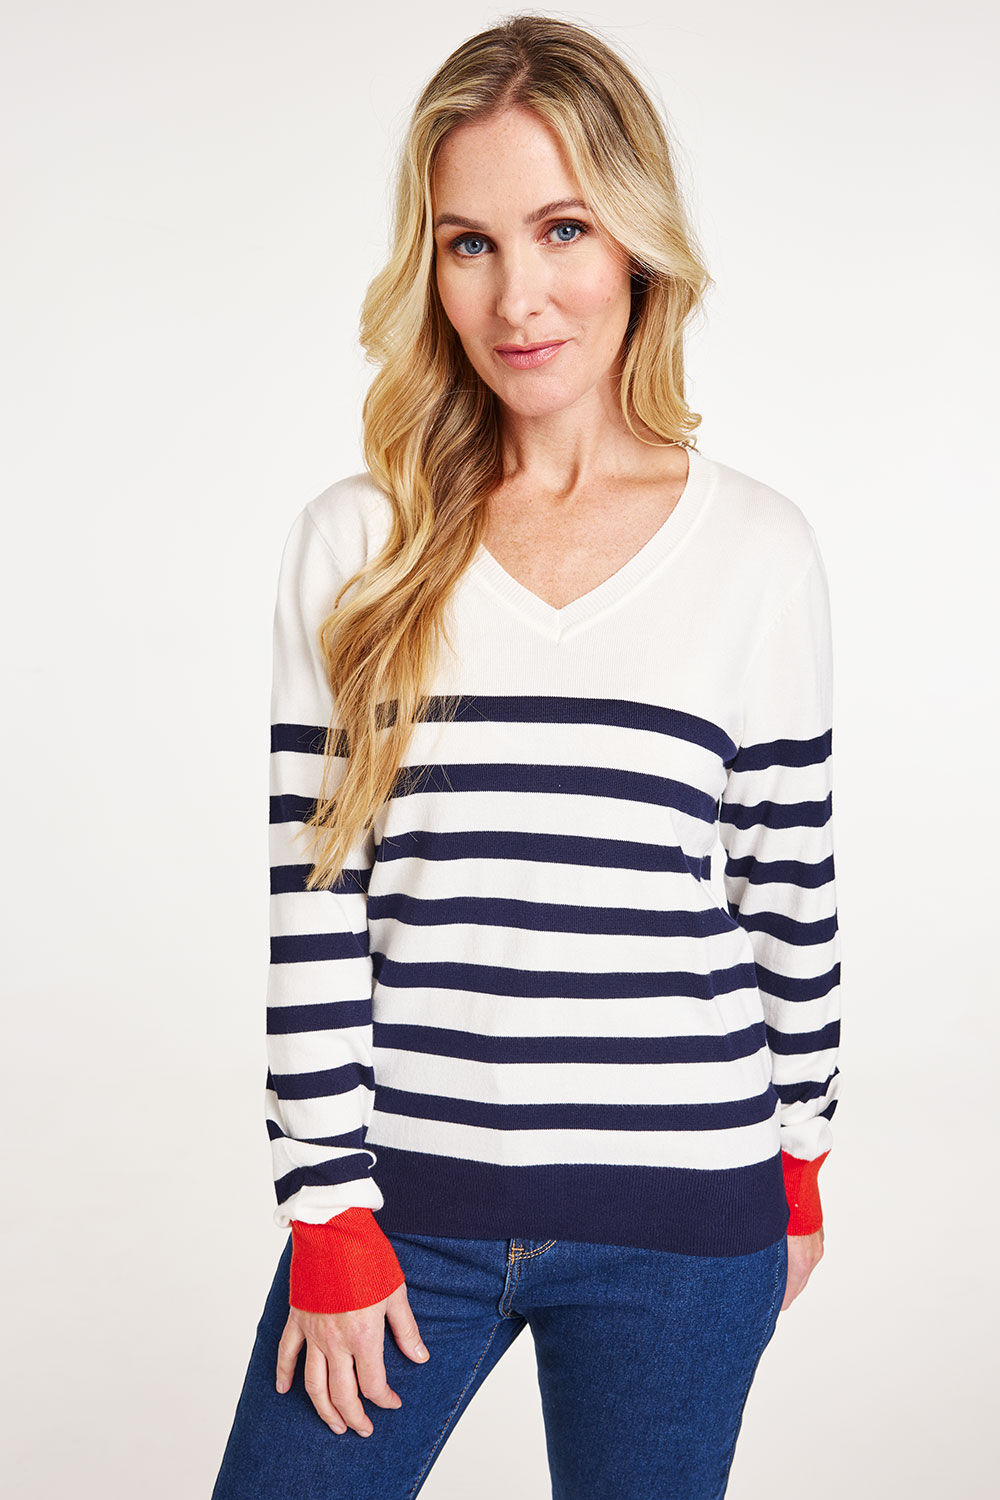 Bonmarche Ivory Long Sleeve Striped Jumper With Cuff Detail, Size: 10